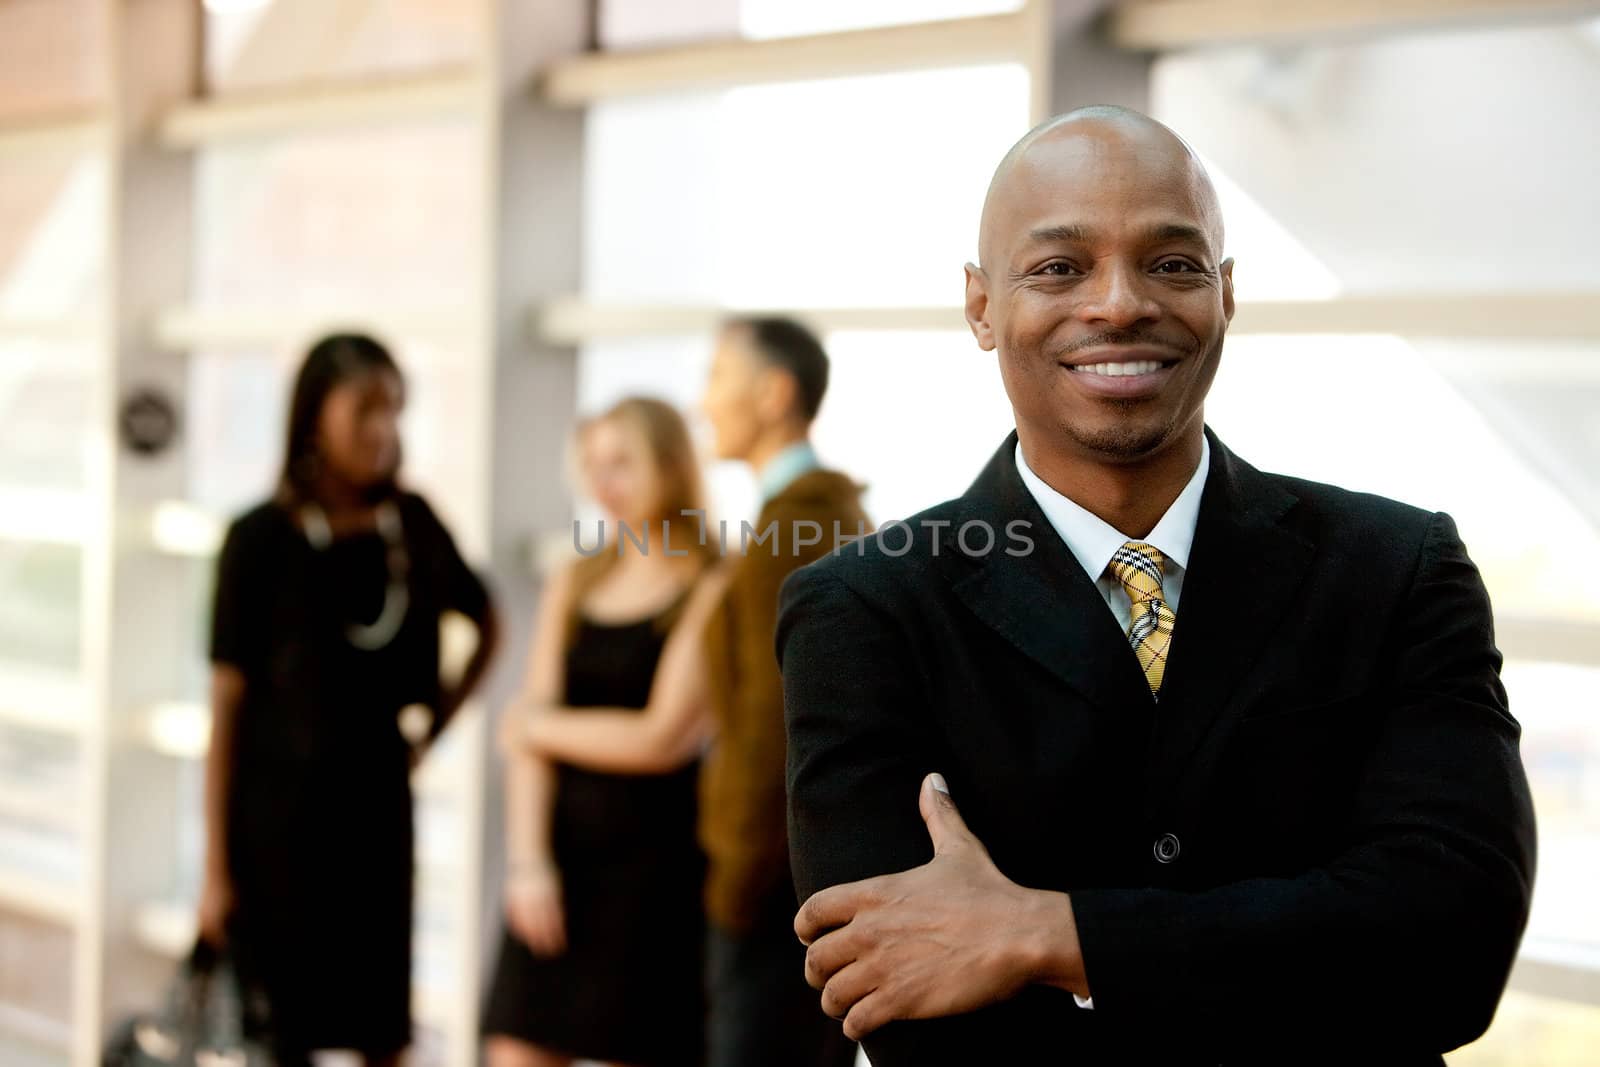 A happy black business man with people in the background